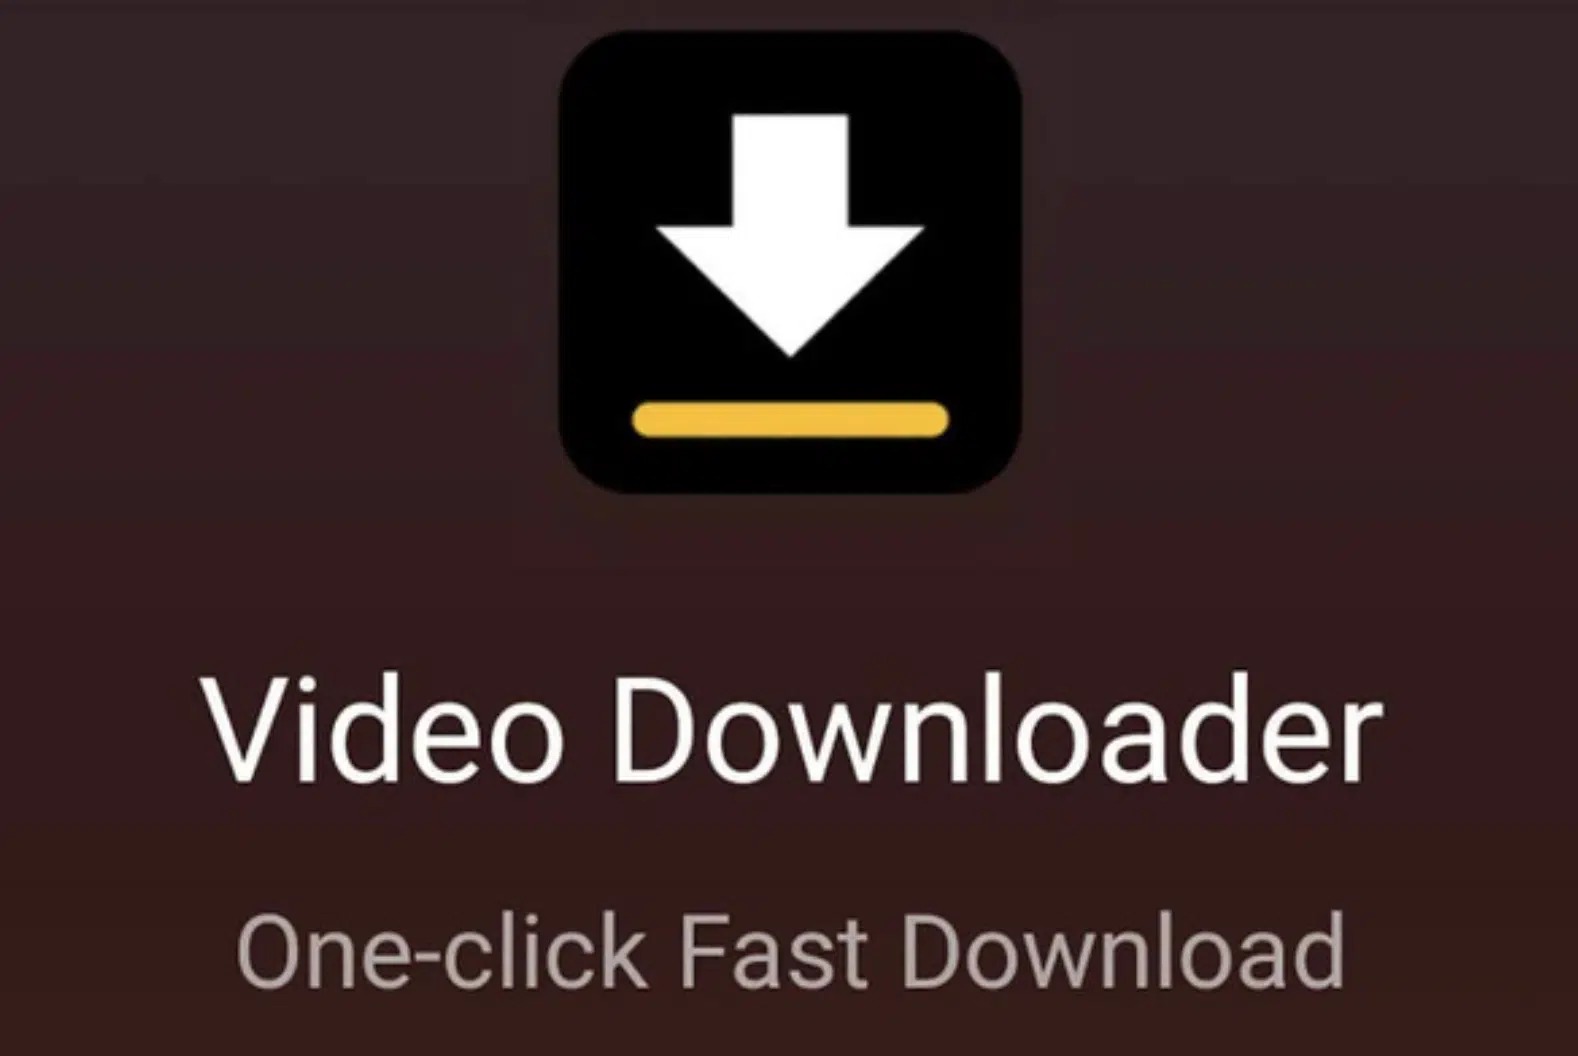 How To Download Videos From Site